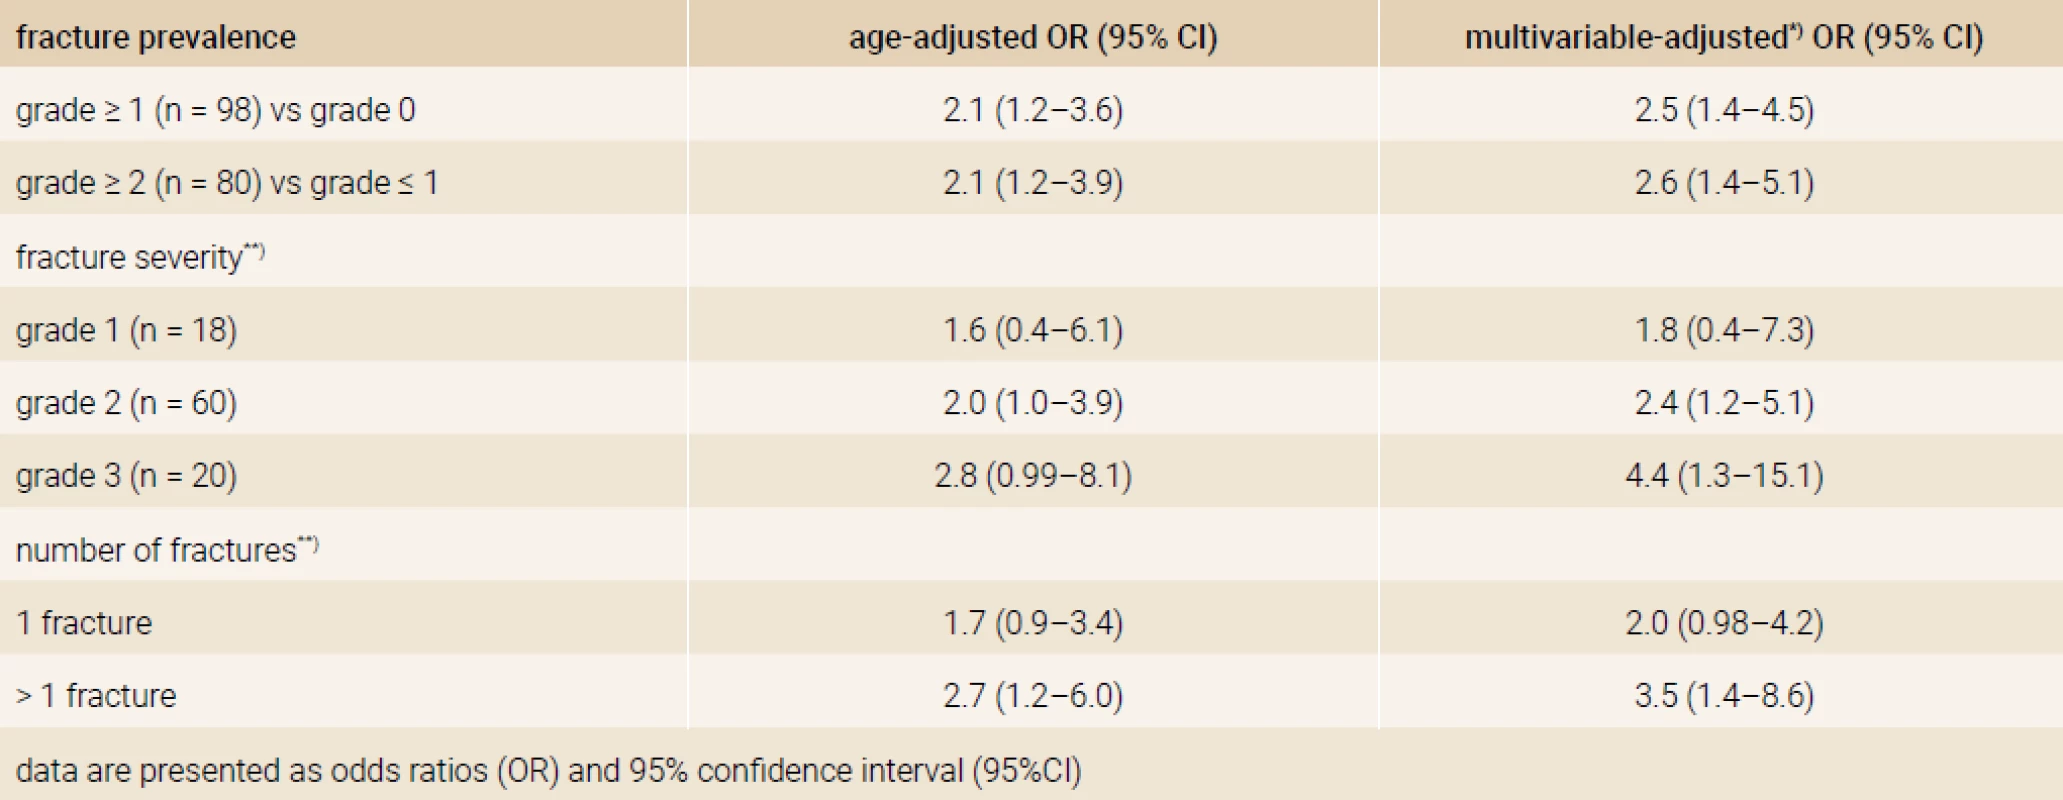 Odds of vertebral fracture associated with abdominal aortic calcification (AAC score > 6 versus ≤ 6)
in 901 men aged 50 and older from the STRAMBO cohort assessed using age-adjusted and
multivariable-adjusted logistic regression. Reproduced from [40]